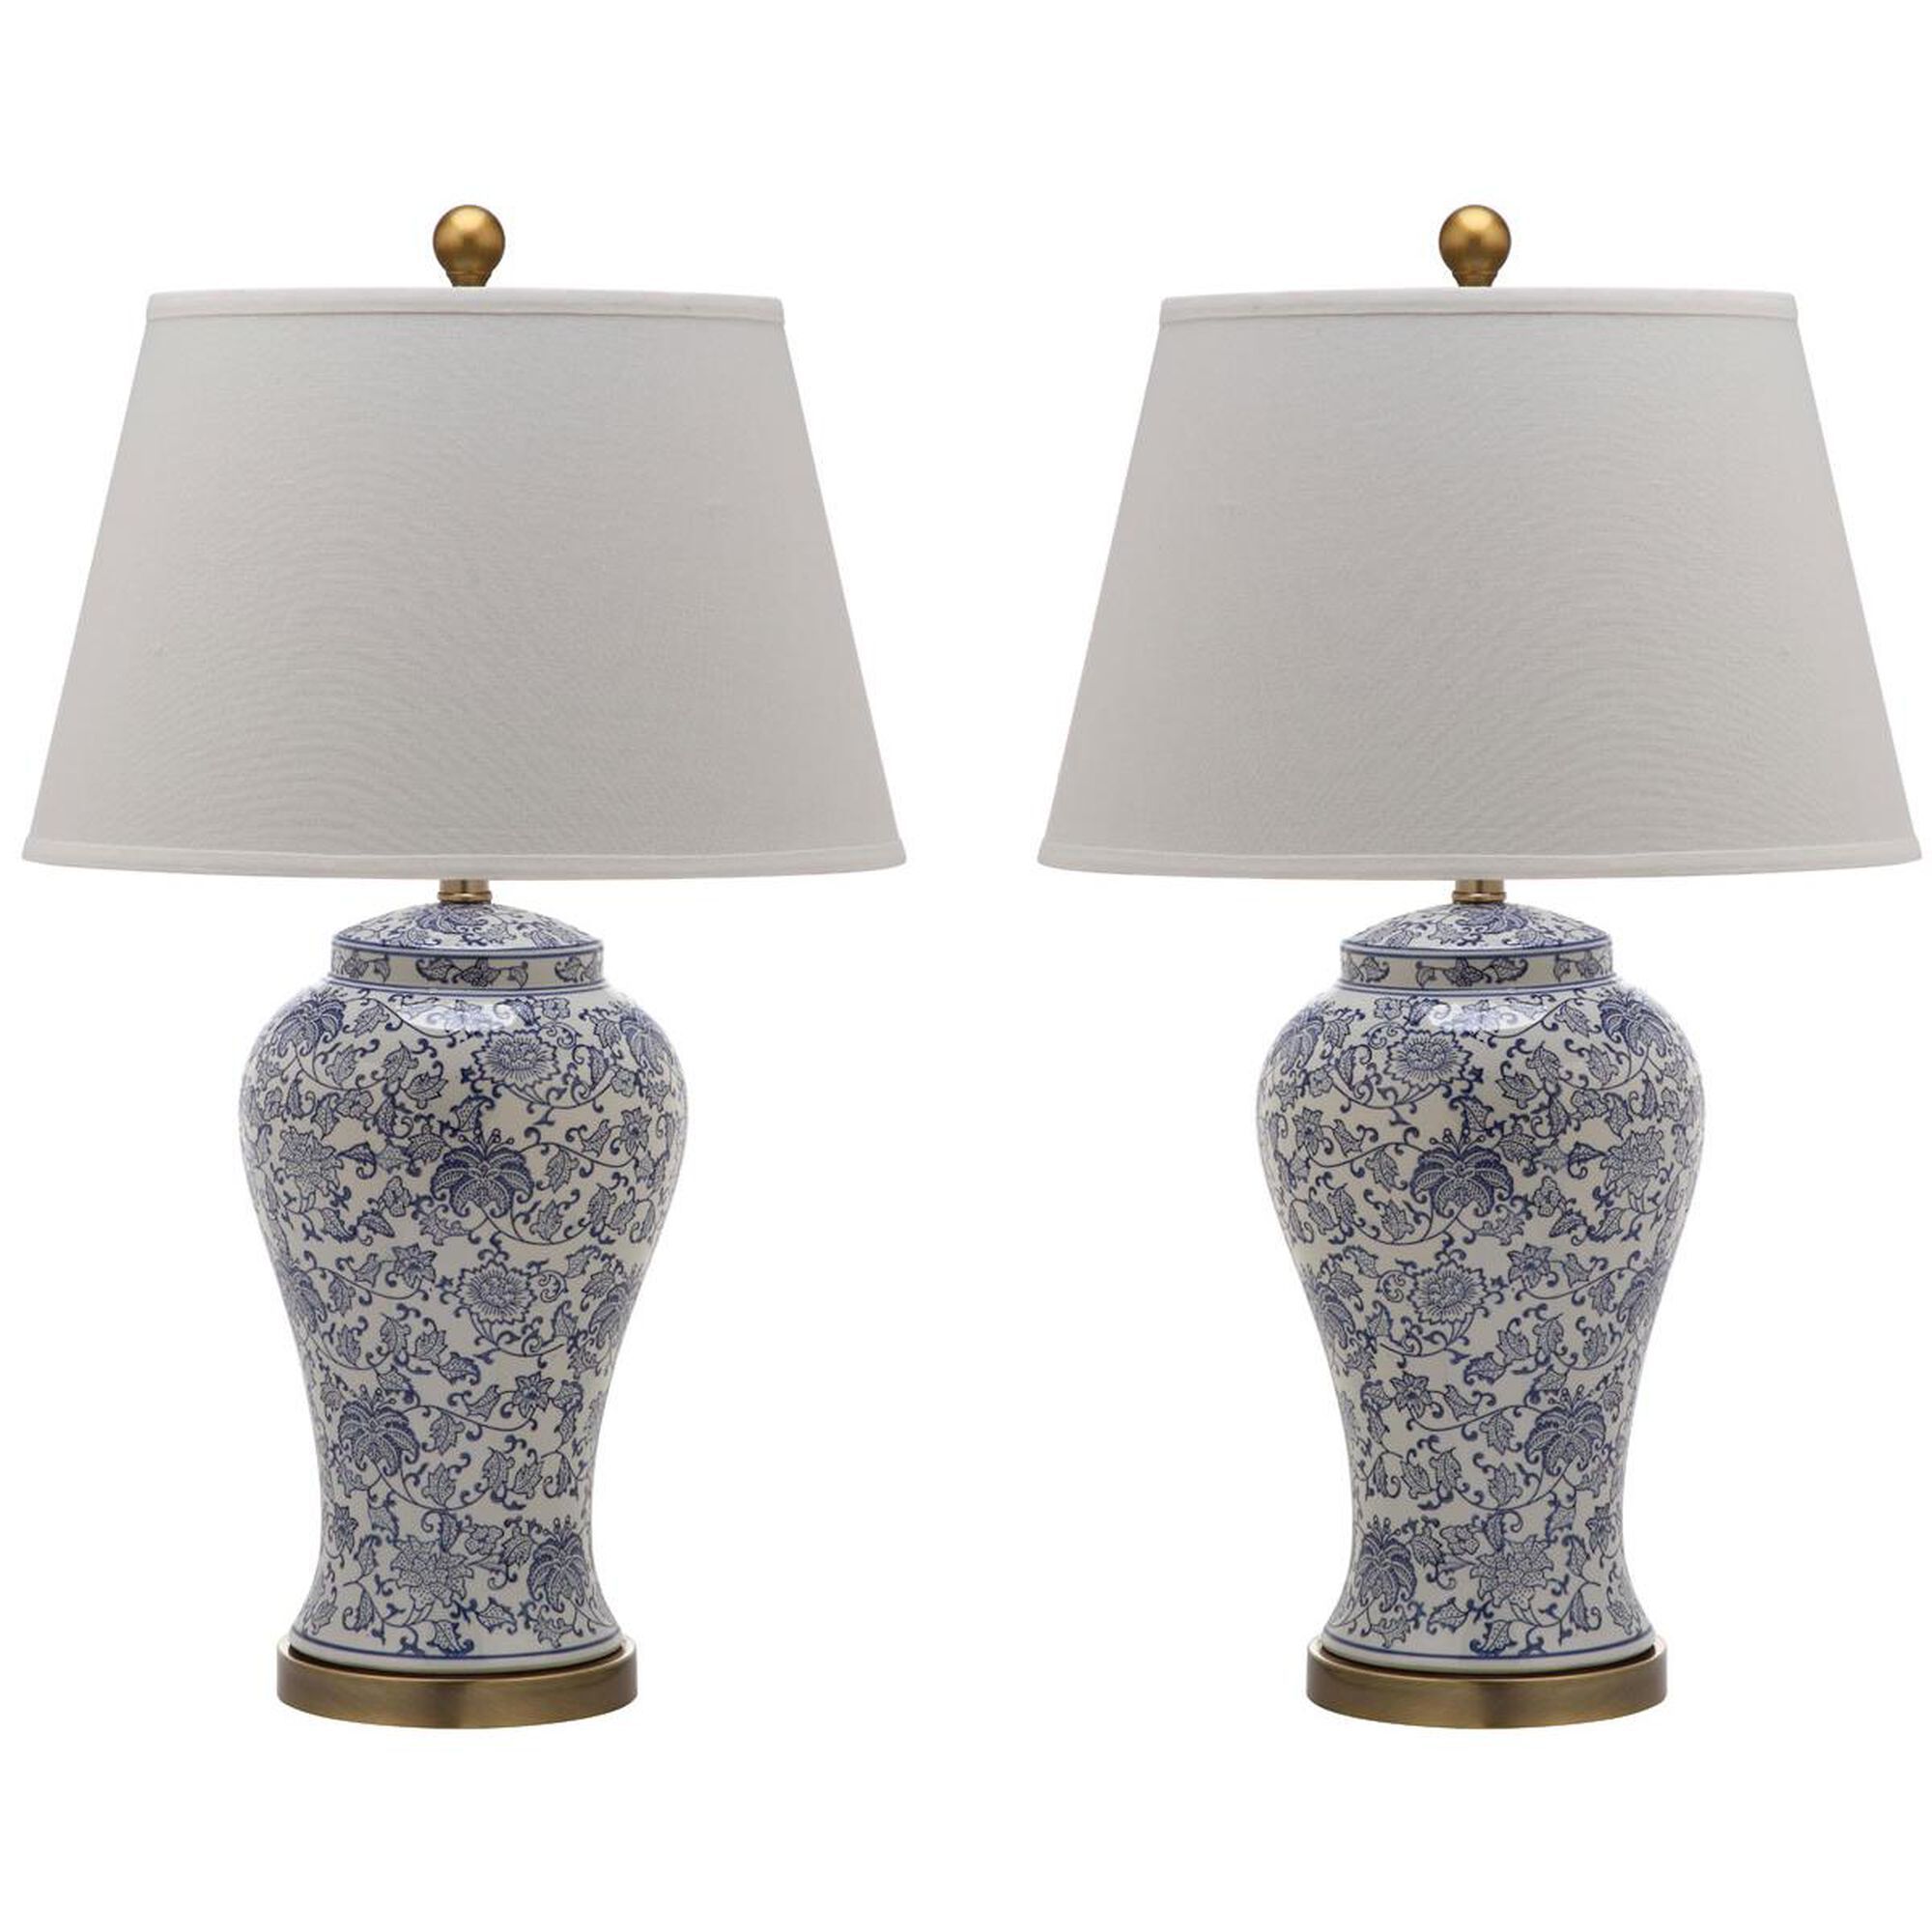 Spring Blossom 29 Inch Set of 2 Table Lamps by Safavieh | 1800 Lighting